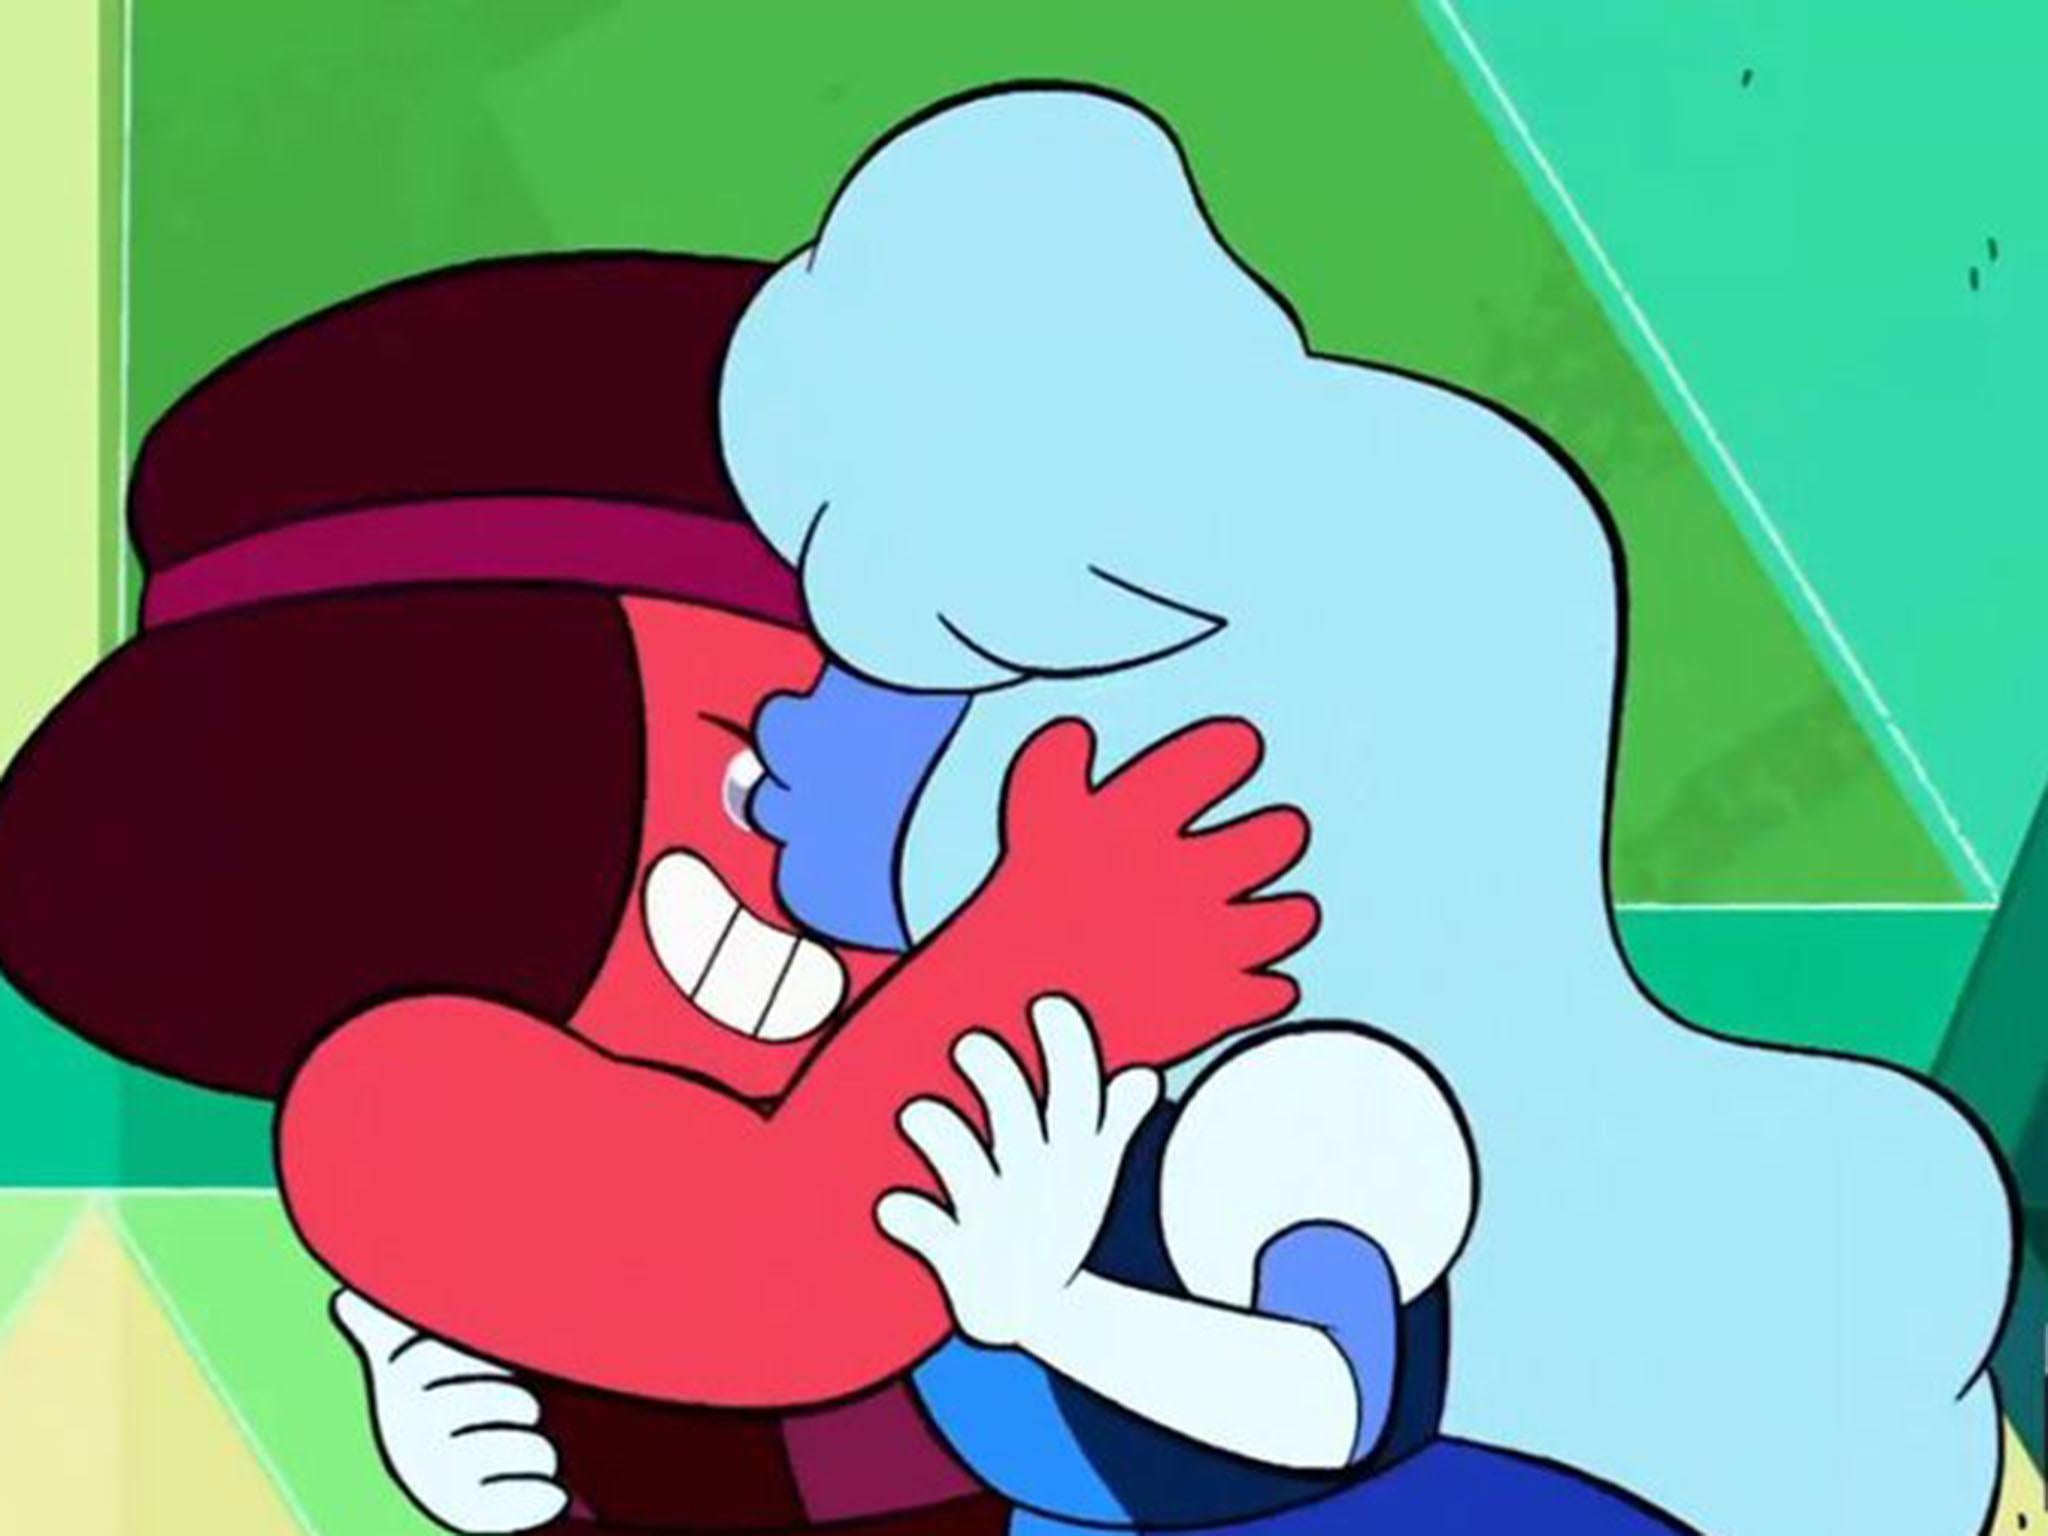 Ruby and Sapphire on 'Steven Universe' are a lesbian couple